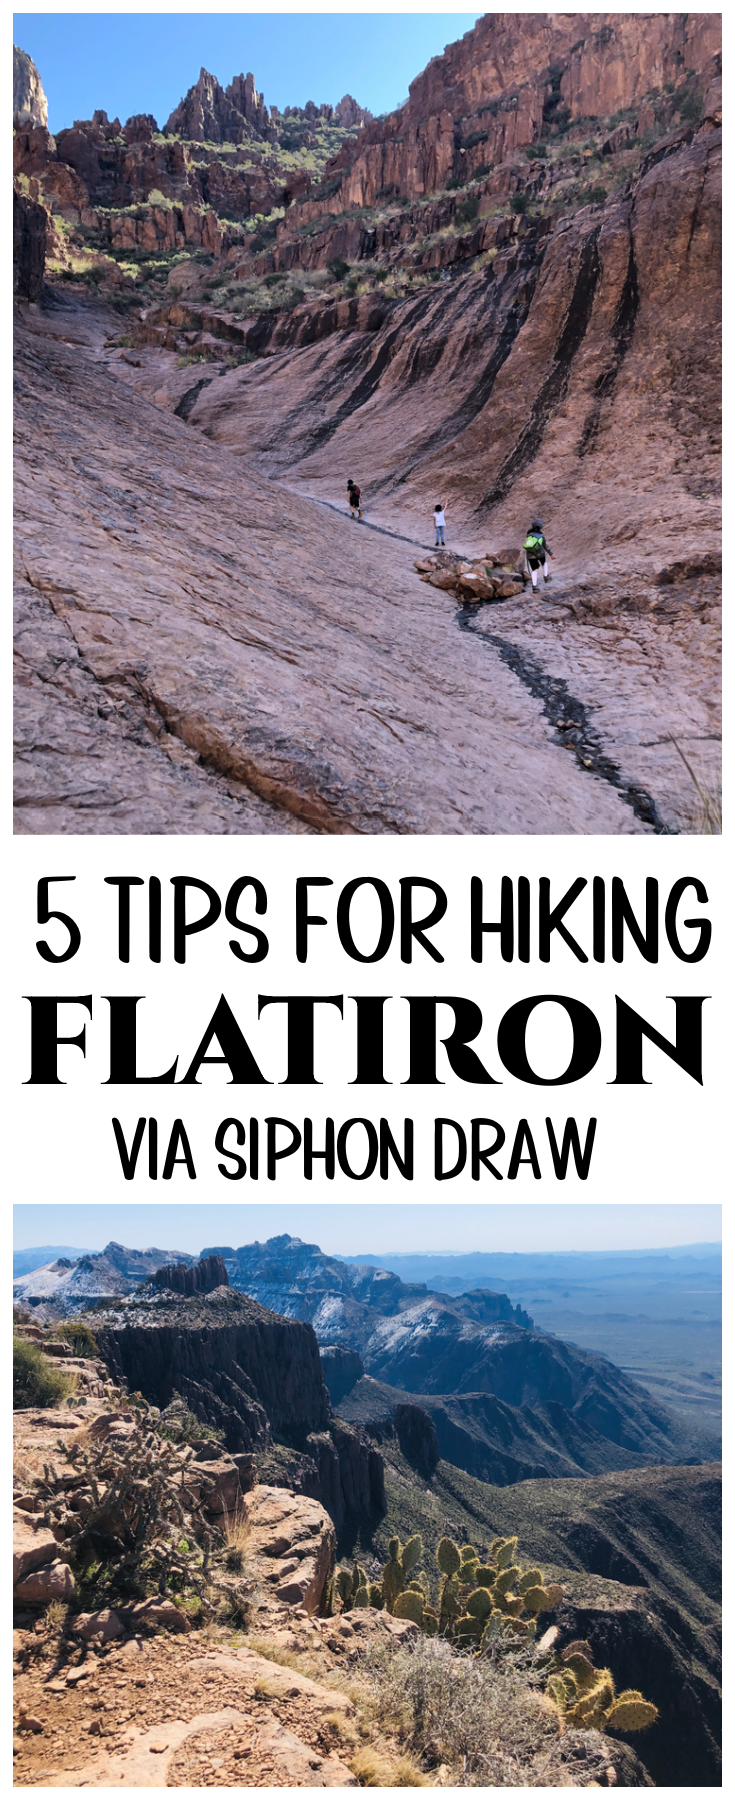 Flatiron via Siphon Draw is one of the most challenging hiking trails in the Phoenix area. Here are 5 tips to help you hike successfully to the summit of Flatiron in the Superstition Mountains!